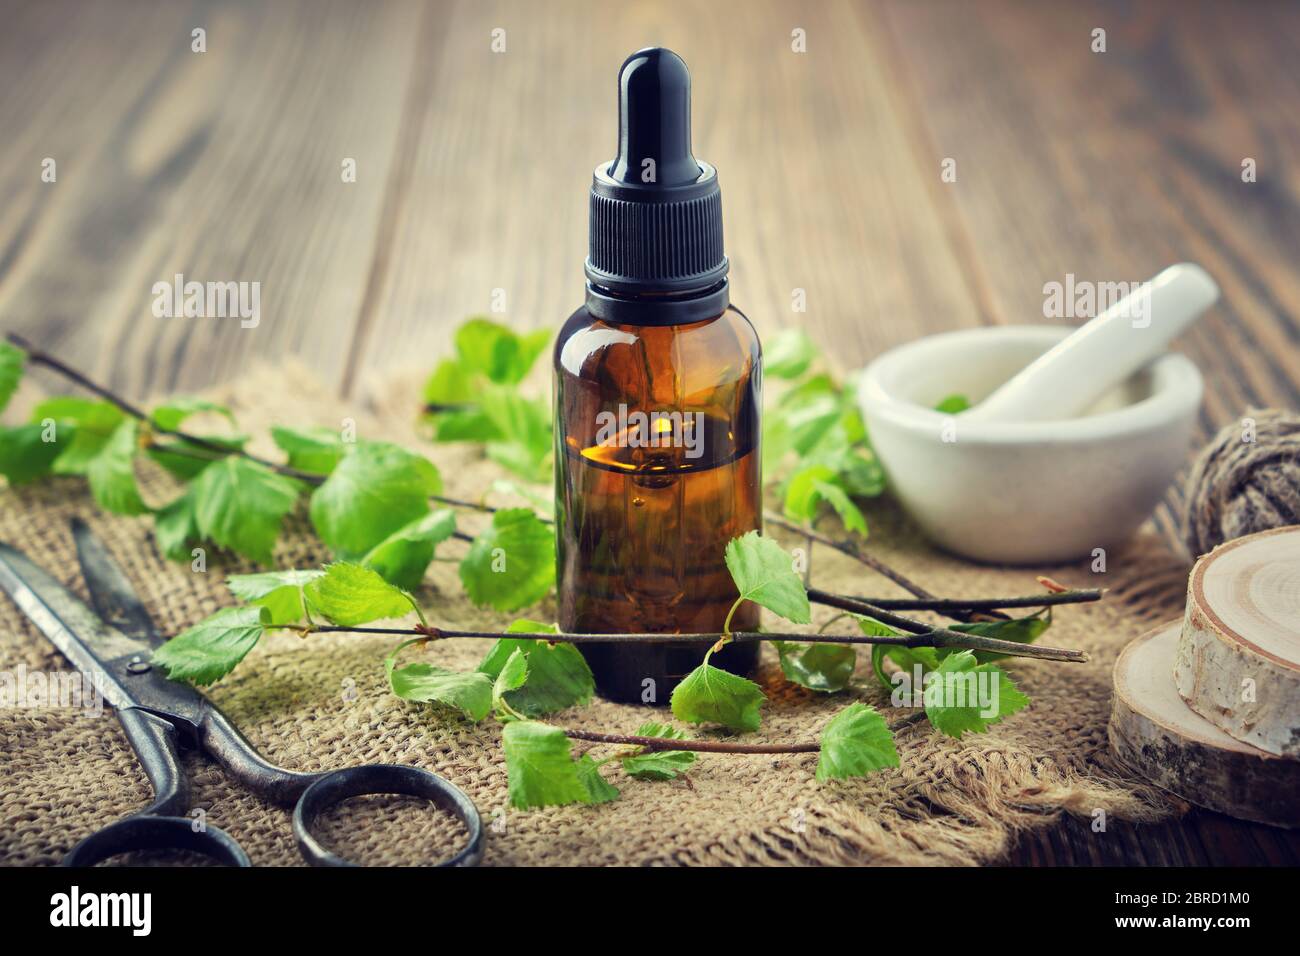 Dropper bottle of birch essential oil, herbal tincture or coal tar. Twigs of Birch tree with leaves, scissors and mortar on table. Stock Photo